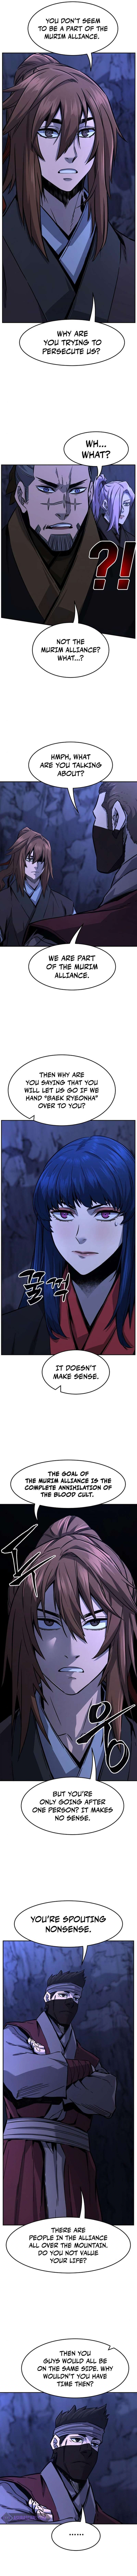 Absolute Sword Sense Chapter 46 page 6